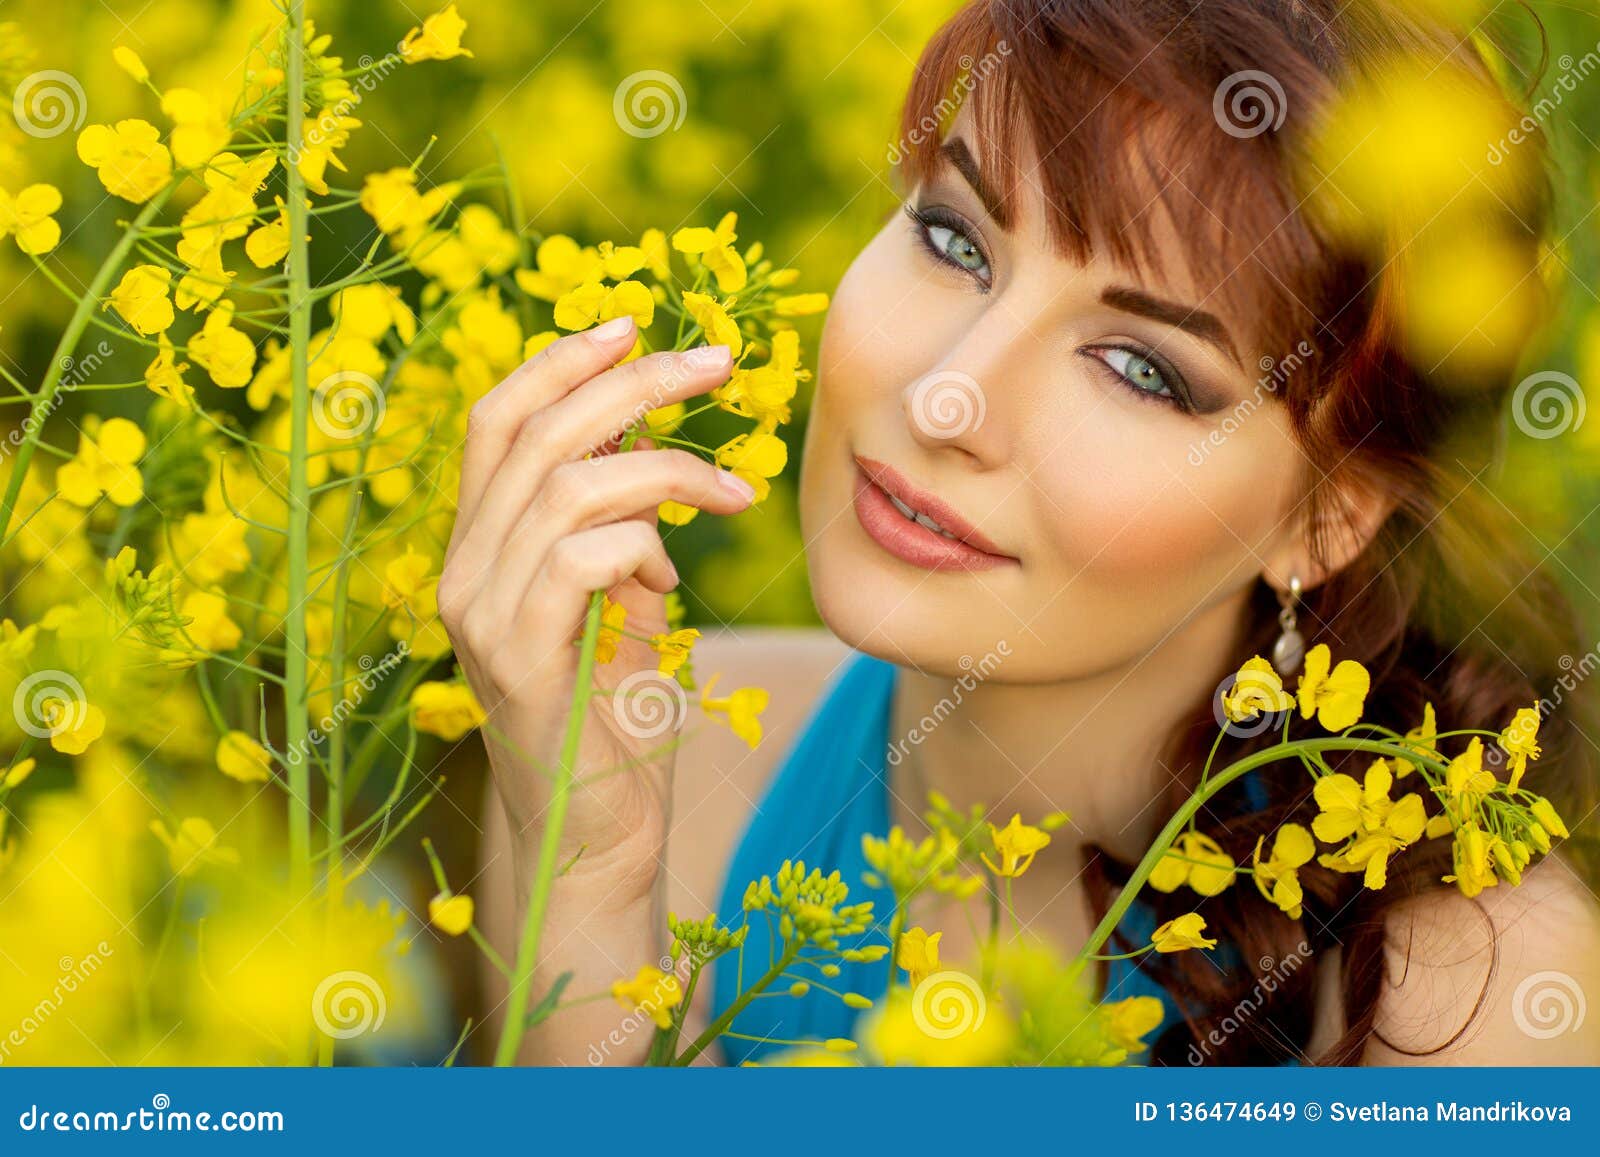 Beautiful Girl in Blue Dress with Yellow Flowers Stock Image - Image of ...